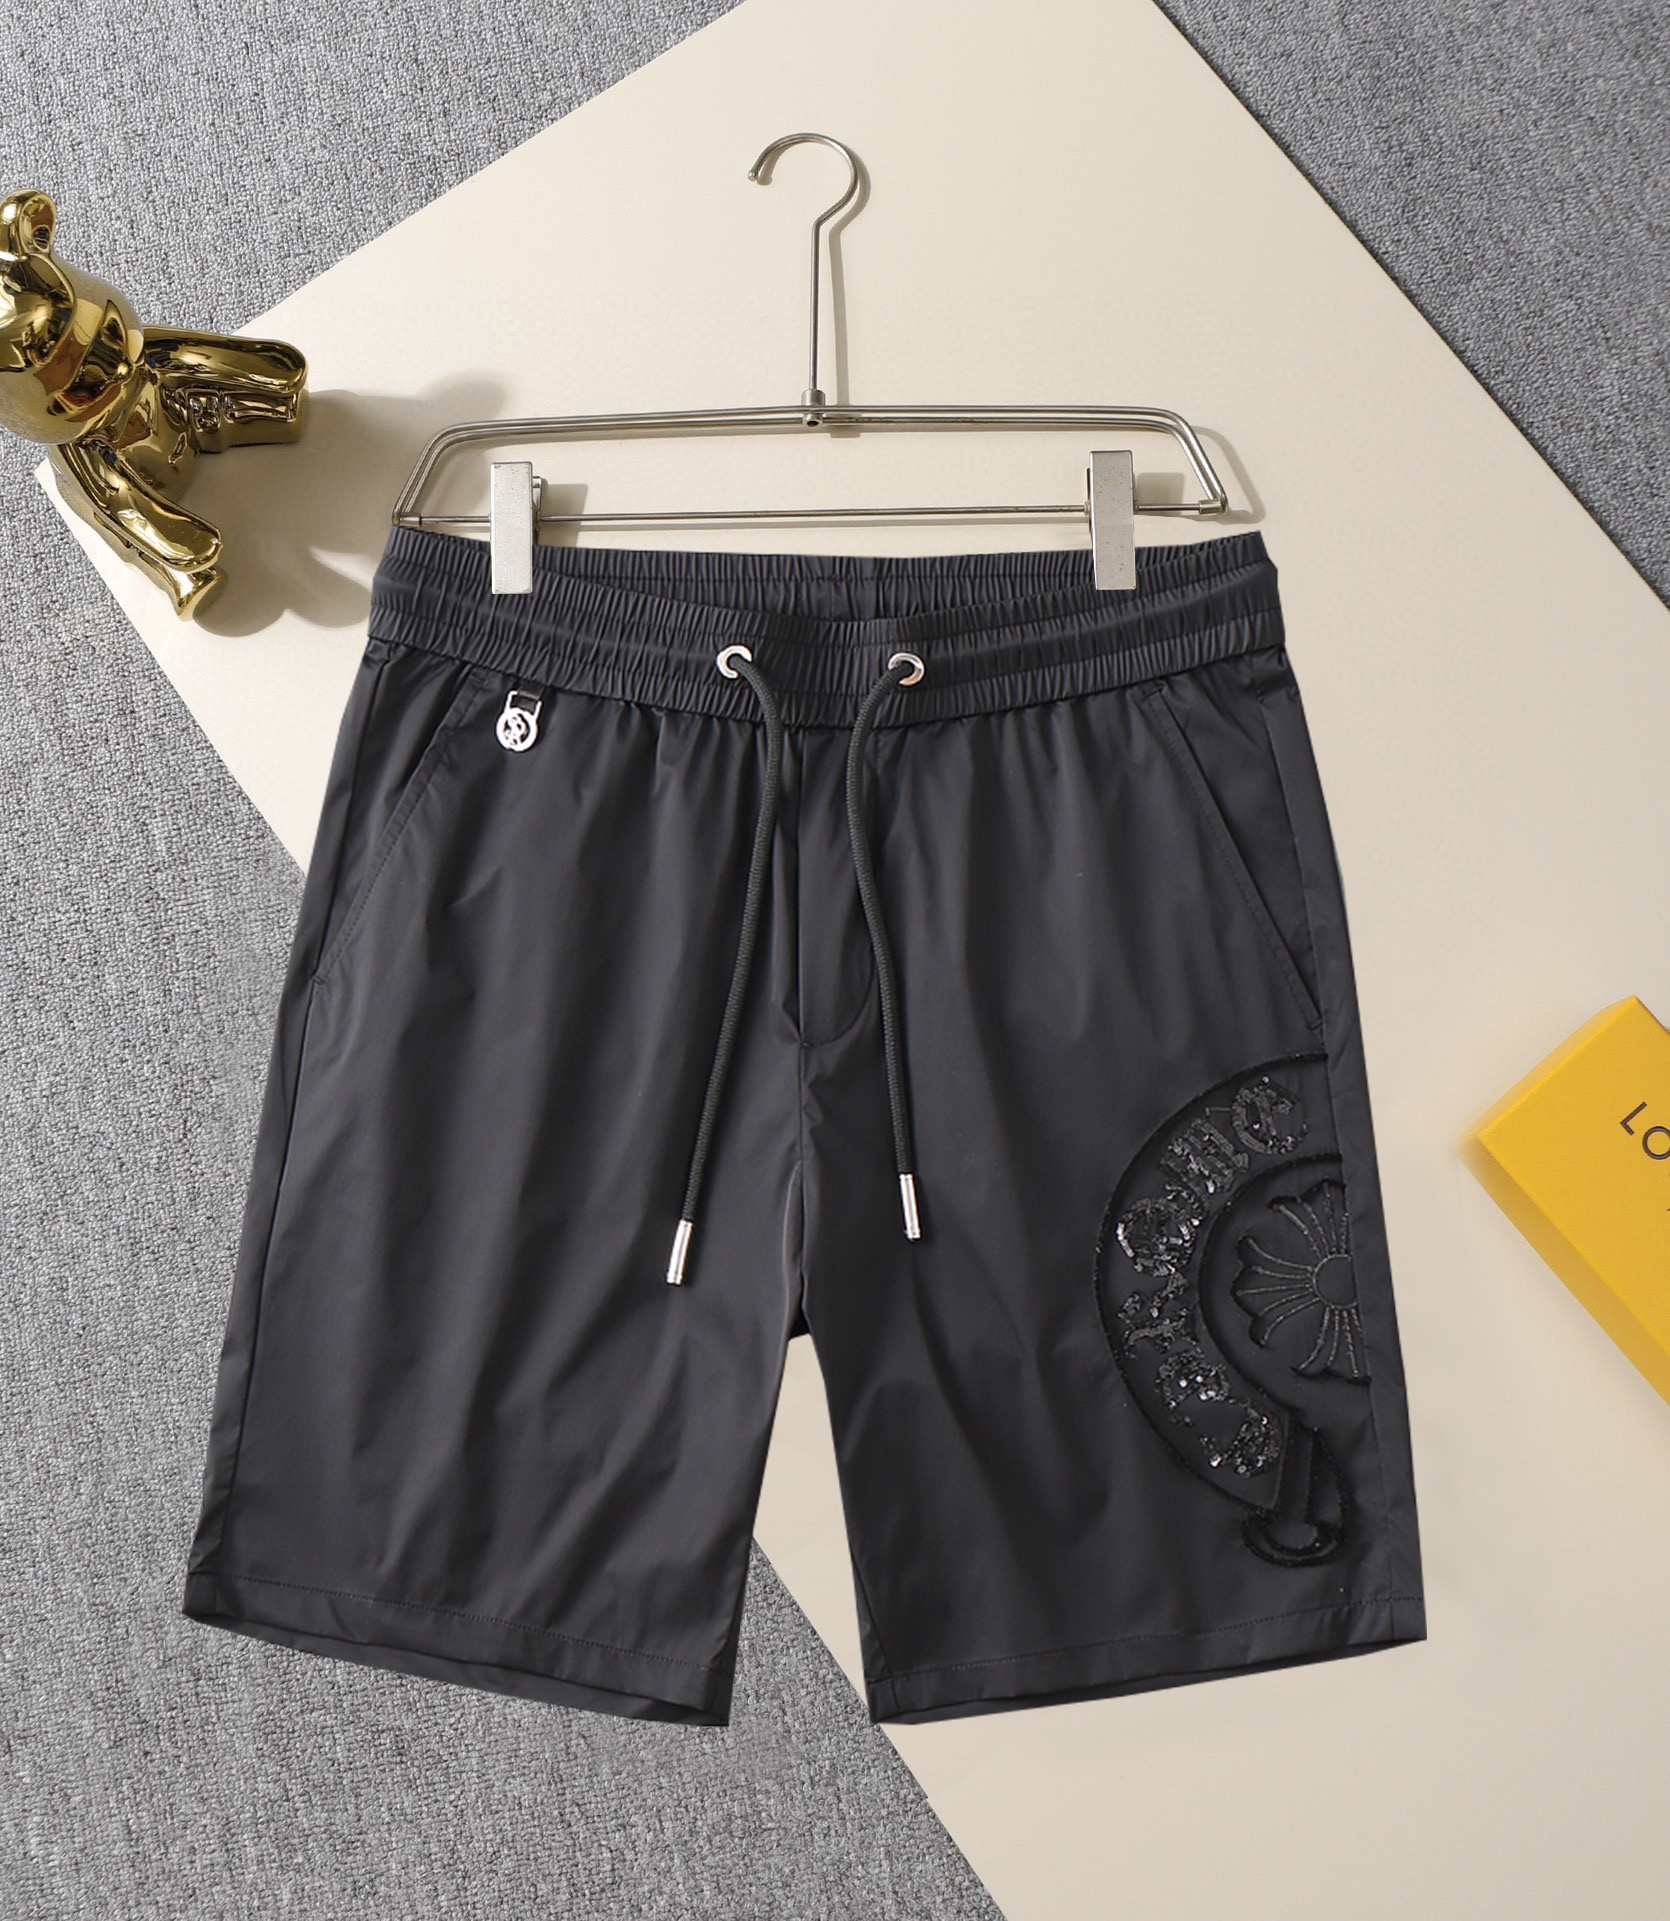 Chrome Hearts Clothing Shorts Customize The Best Replica
 Men Summer Collection Casual